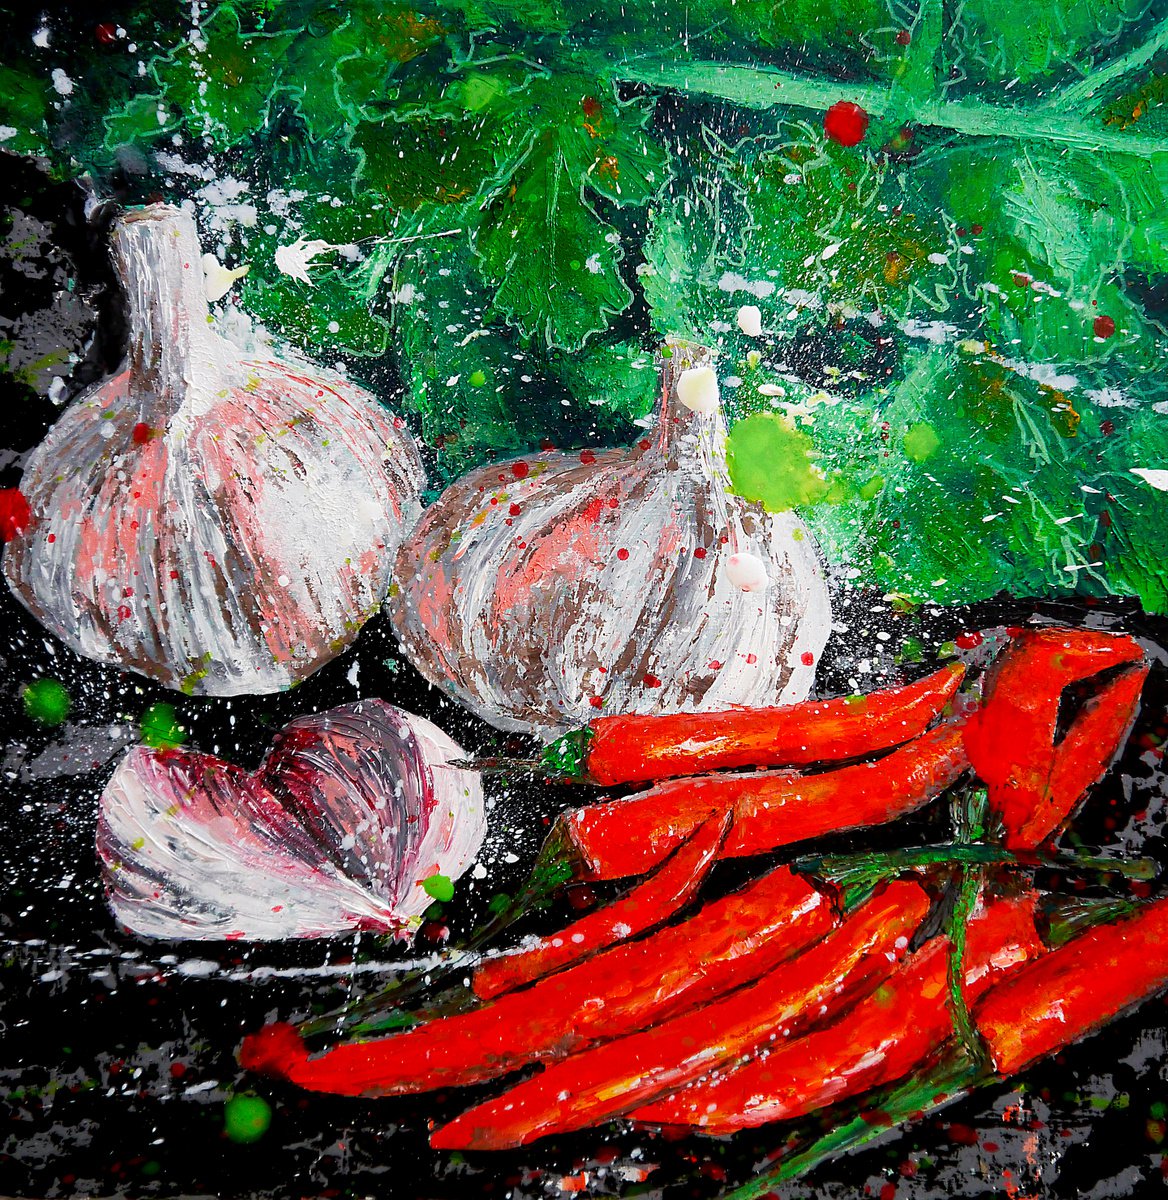 Star Wars Garlics and Red hot Chili peppers - Still life - READY TO HANG - HOME - Gift by Bazevian DelaCapucinire